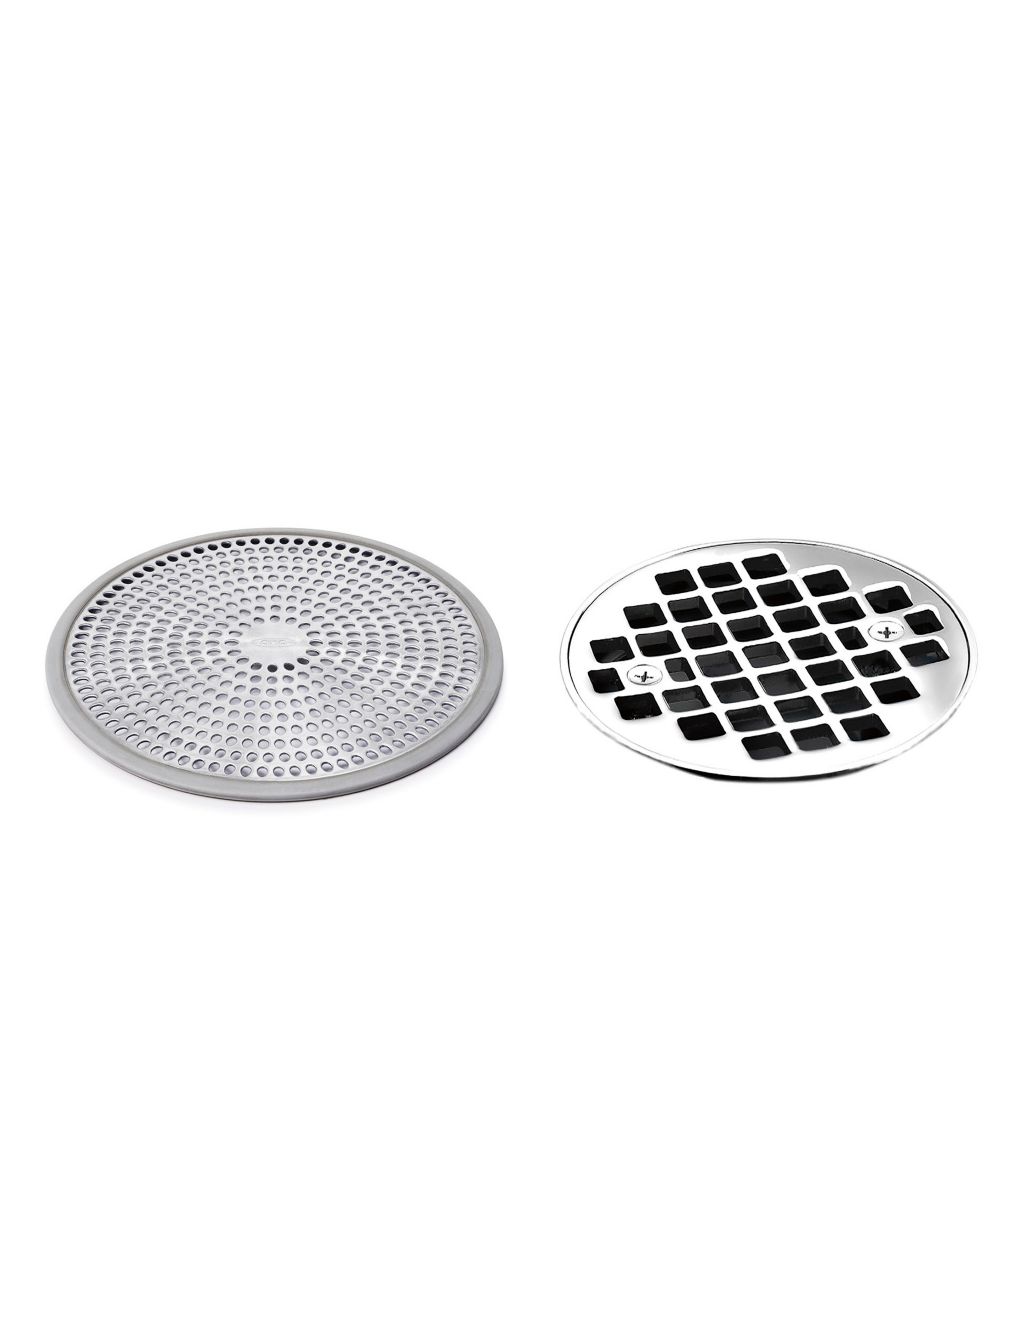 Good Grips Shower Drain Protector image 3